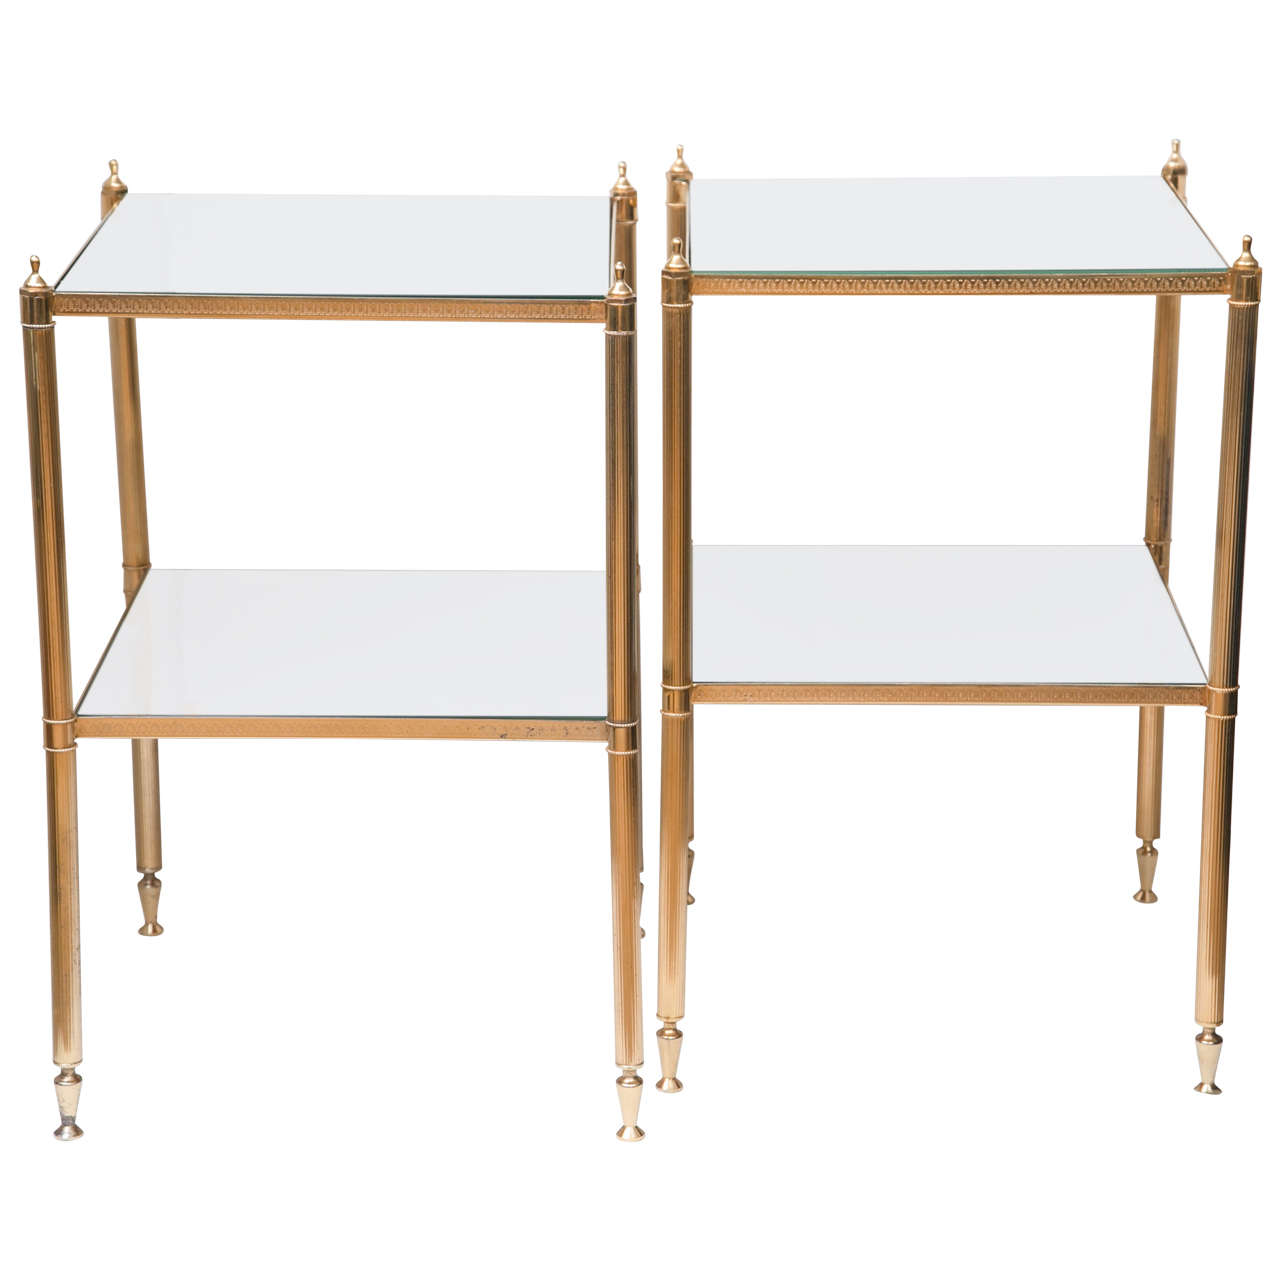 Pair of Gilt Brass End Tables with Mirrored Glass